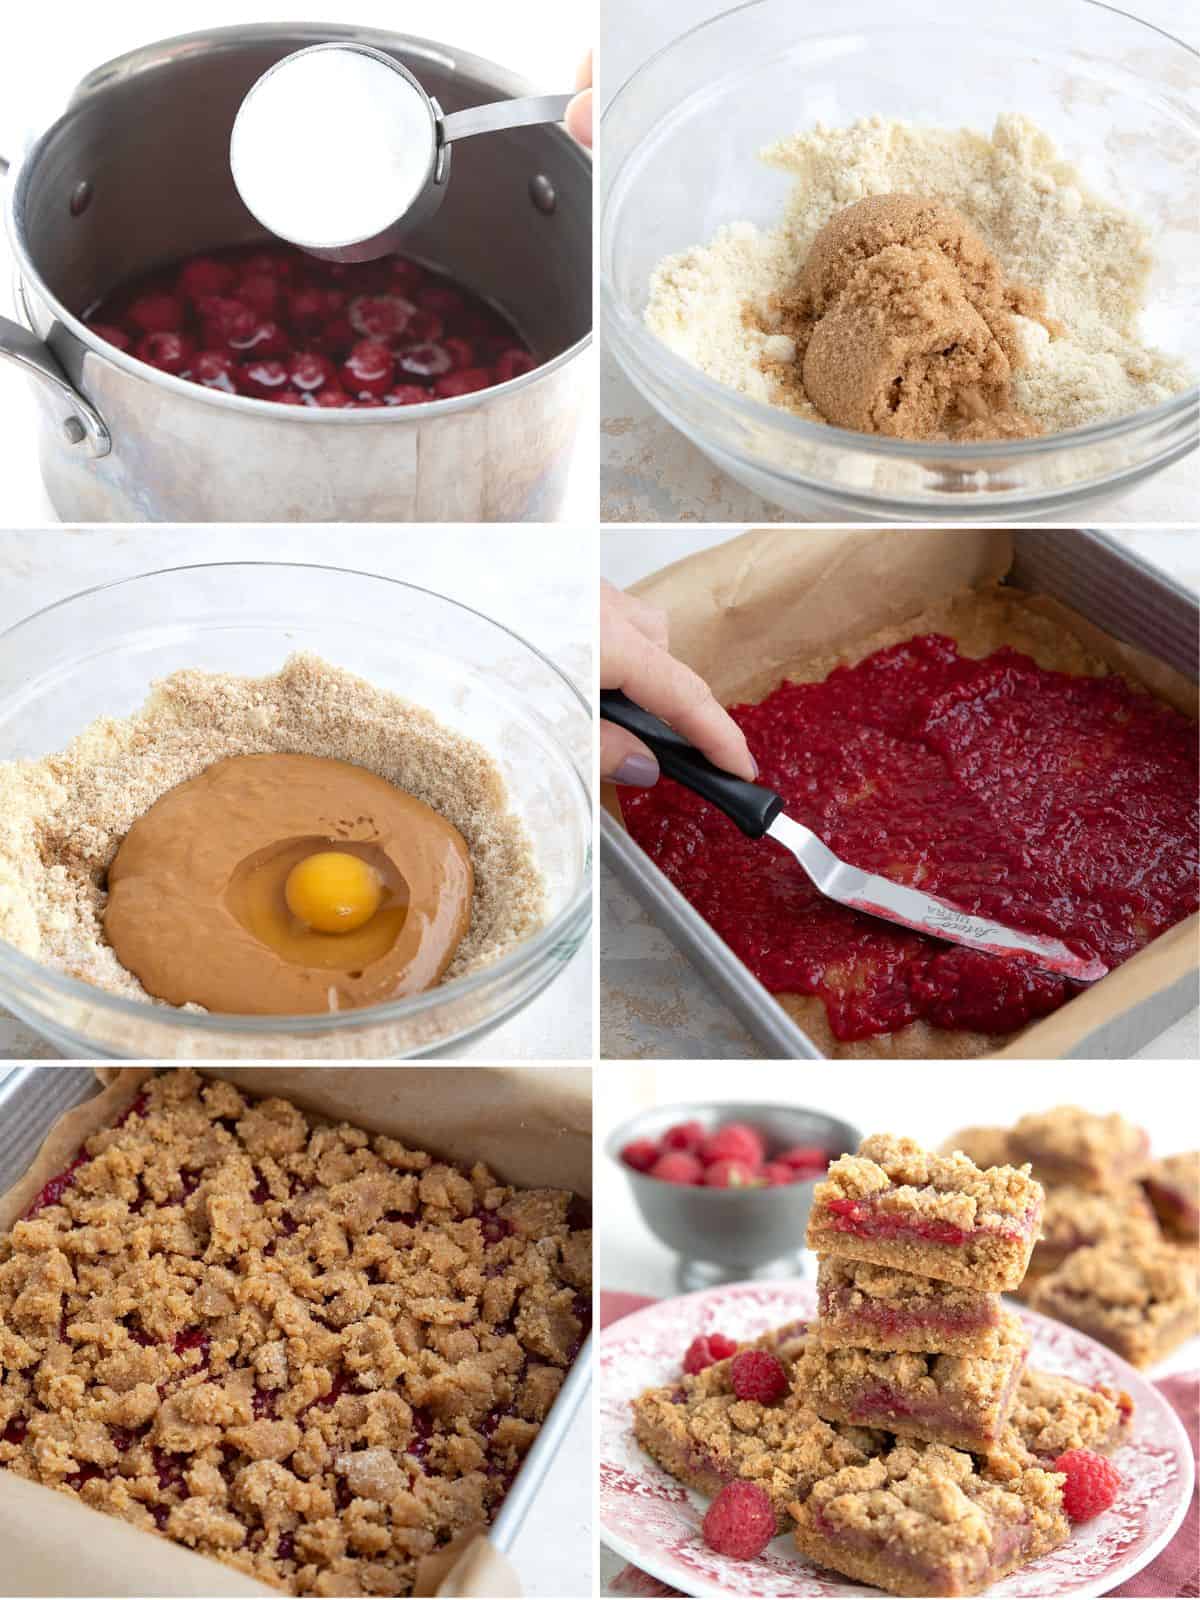 A collage of 6 images showing the steps for making Peanut Butter and Jelly Bars